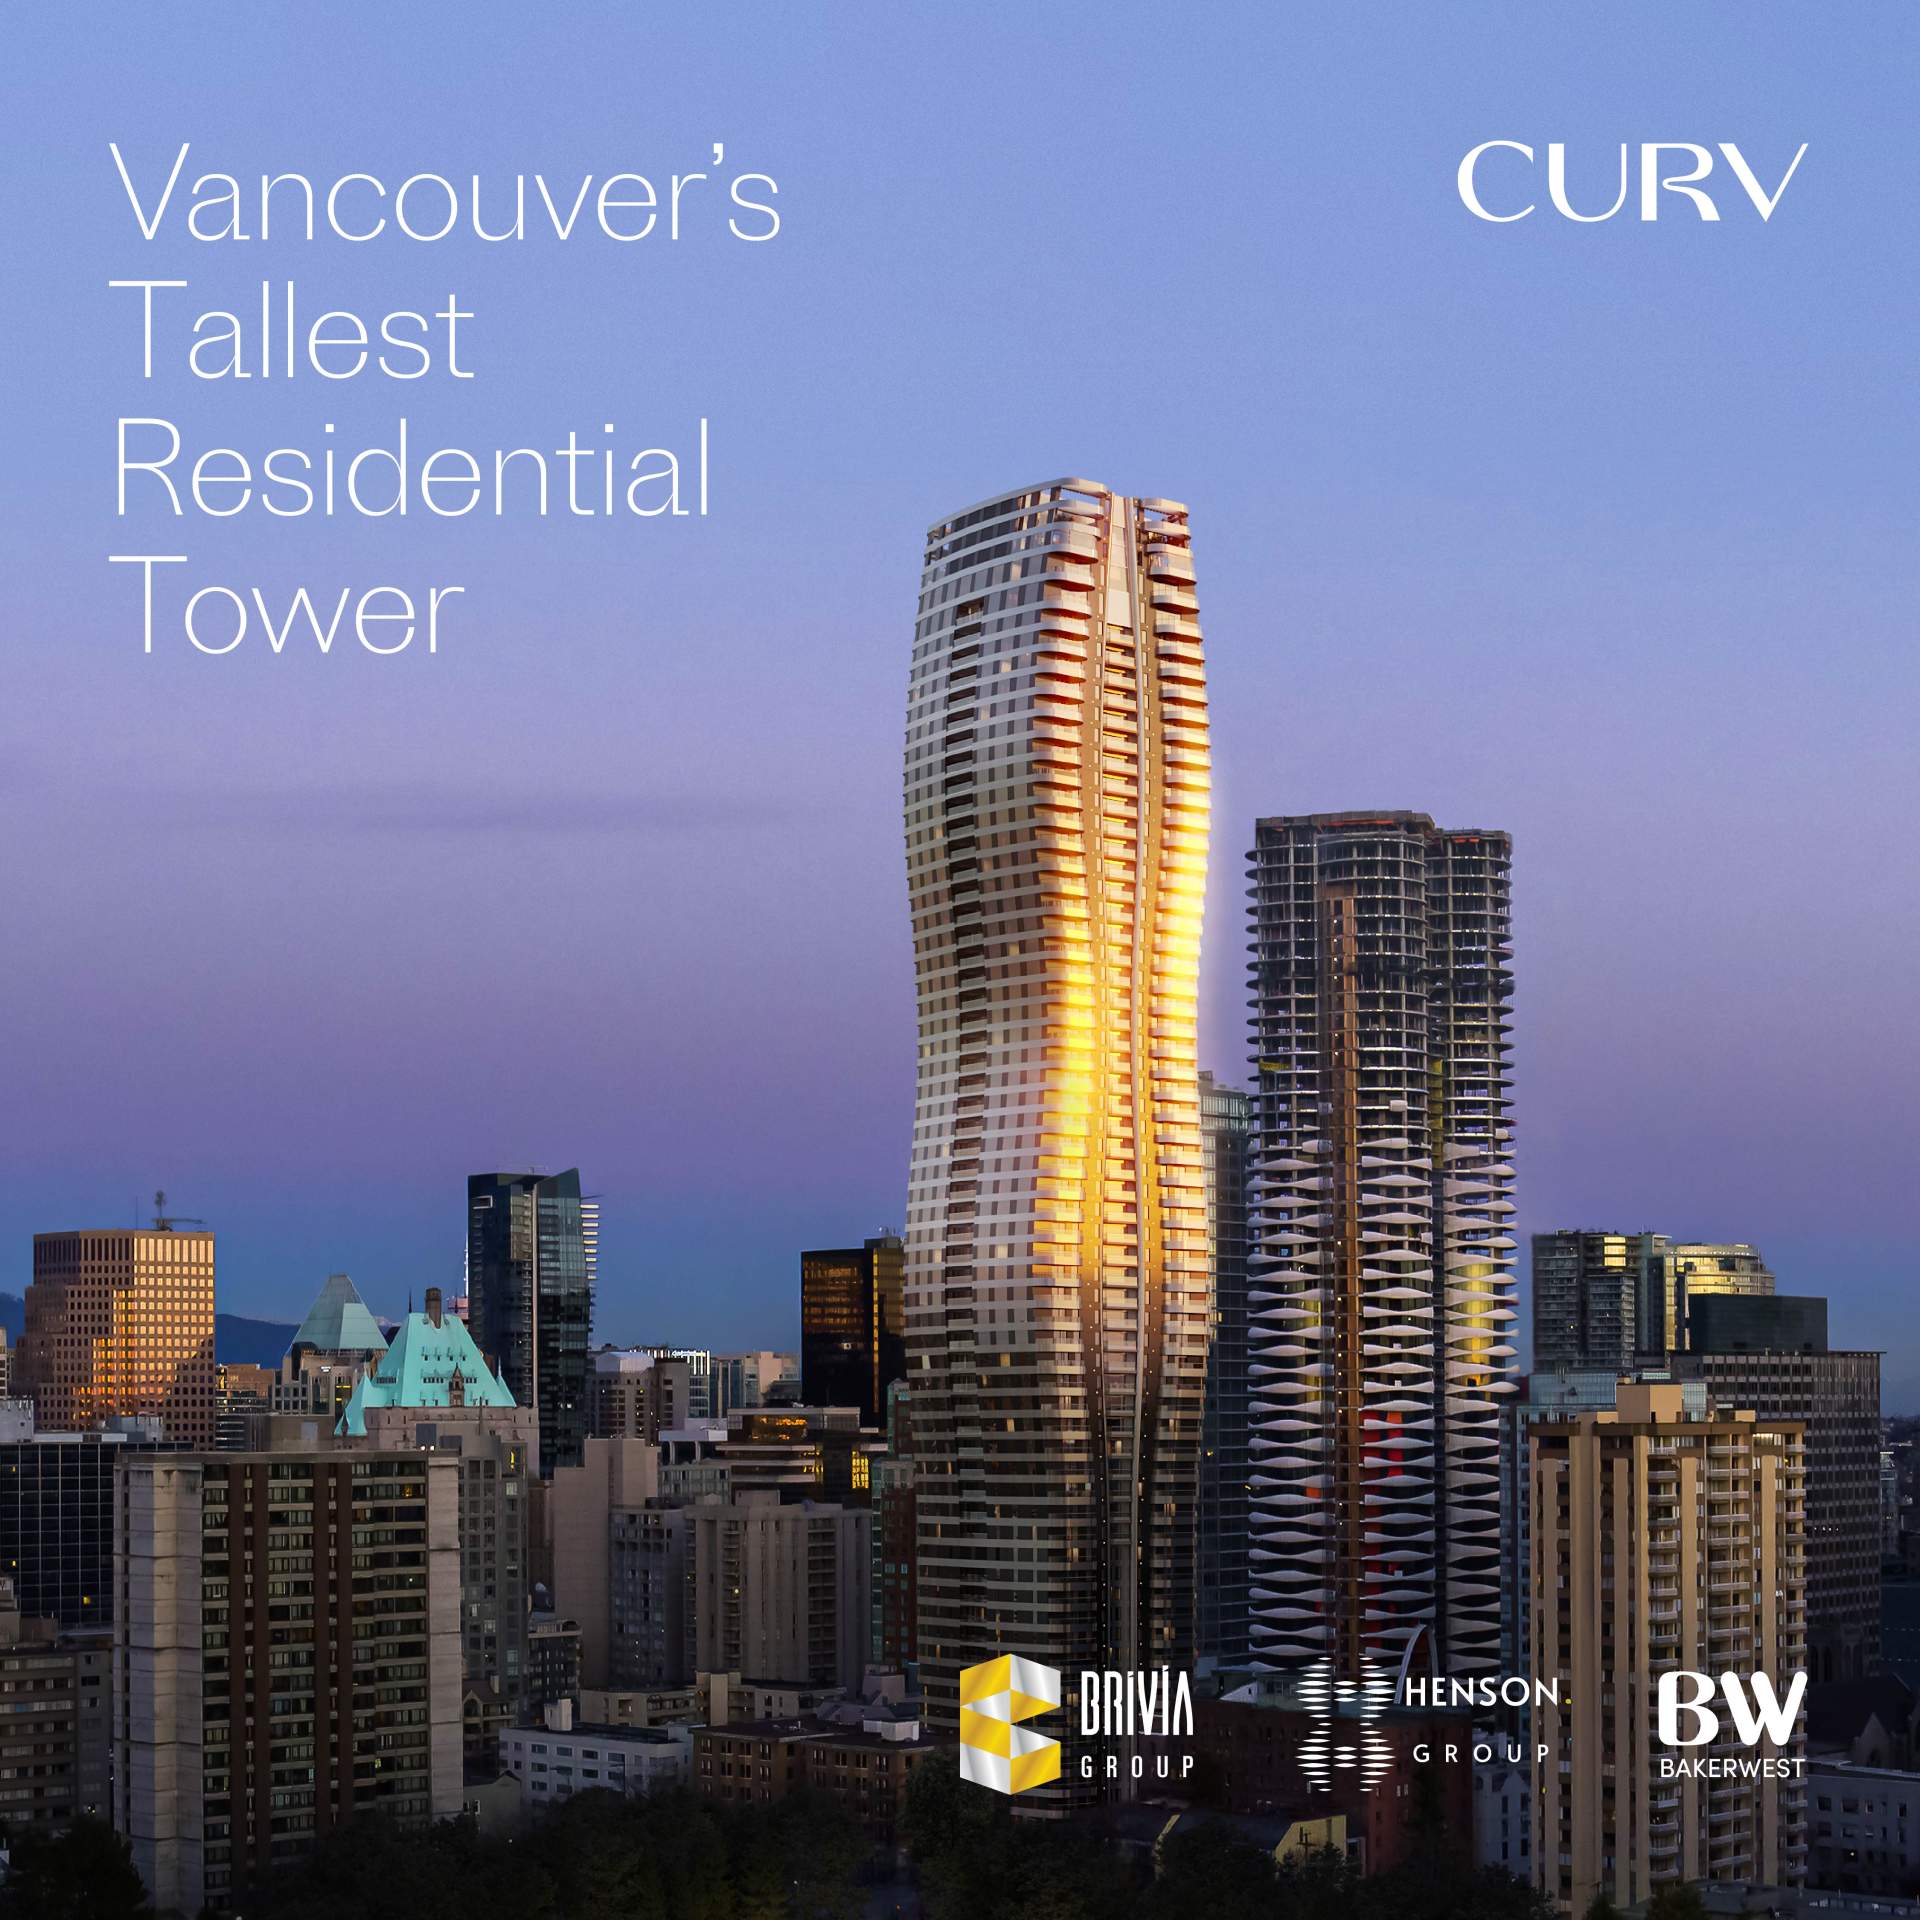 Curv condos tower set against other city towers